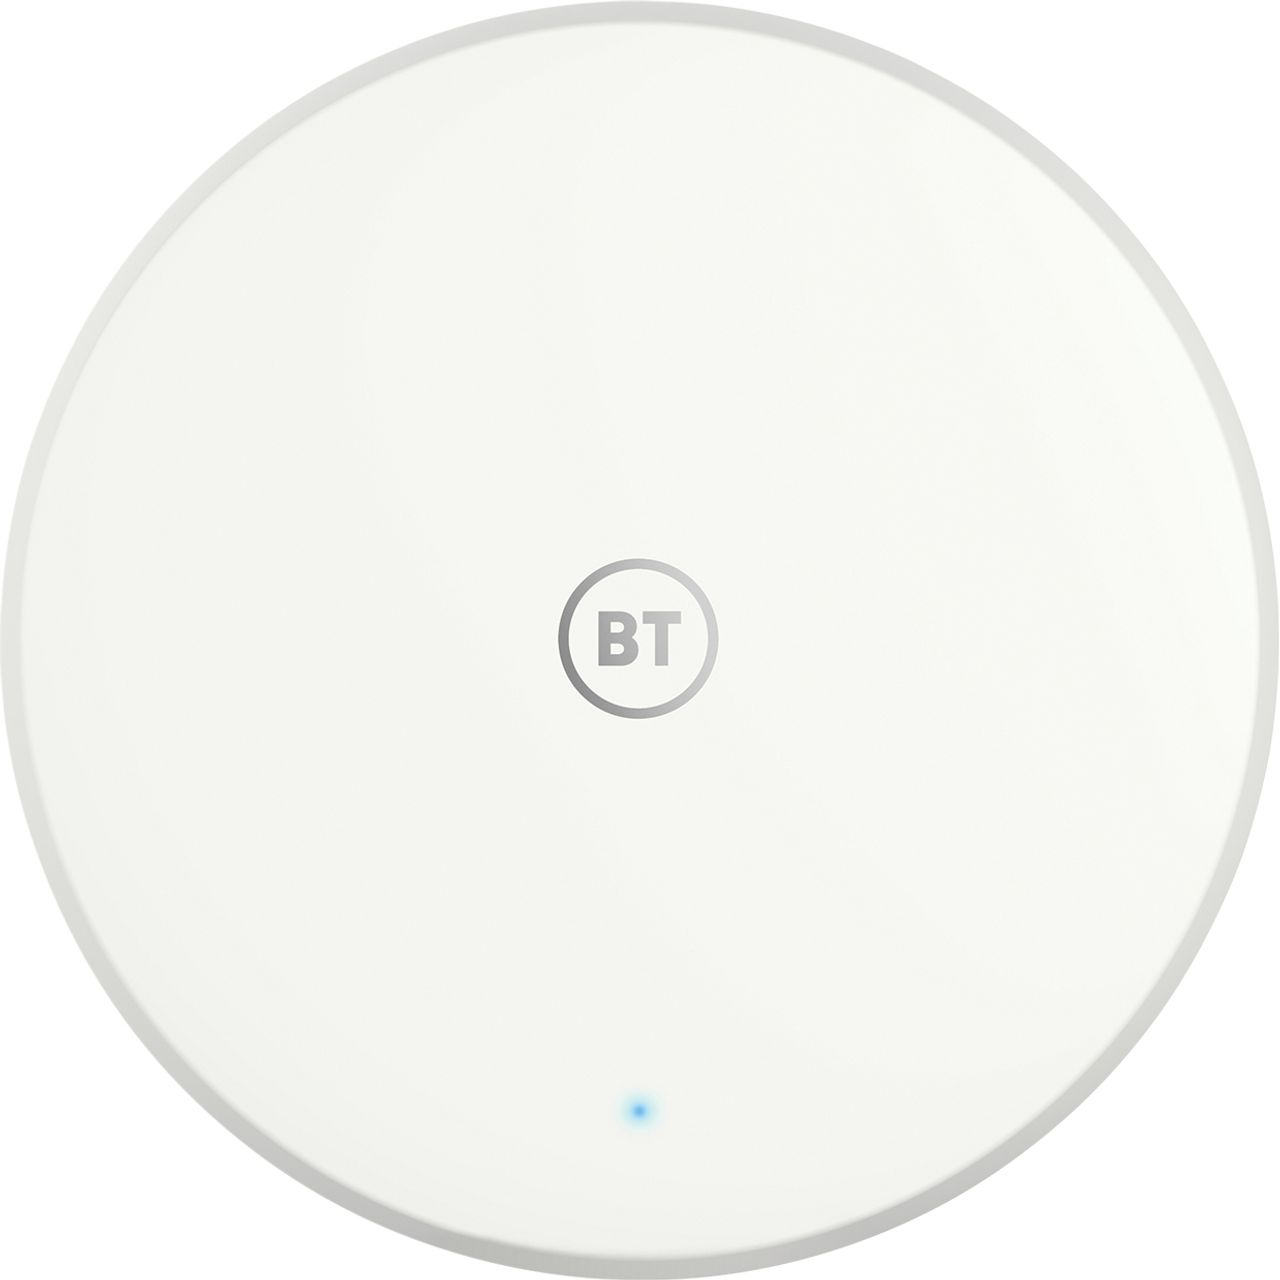 BT Mini Whole Home WiFi Add on disc for Mesh Network Review